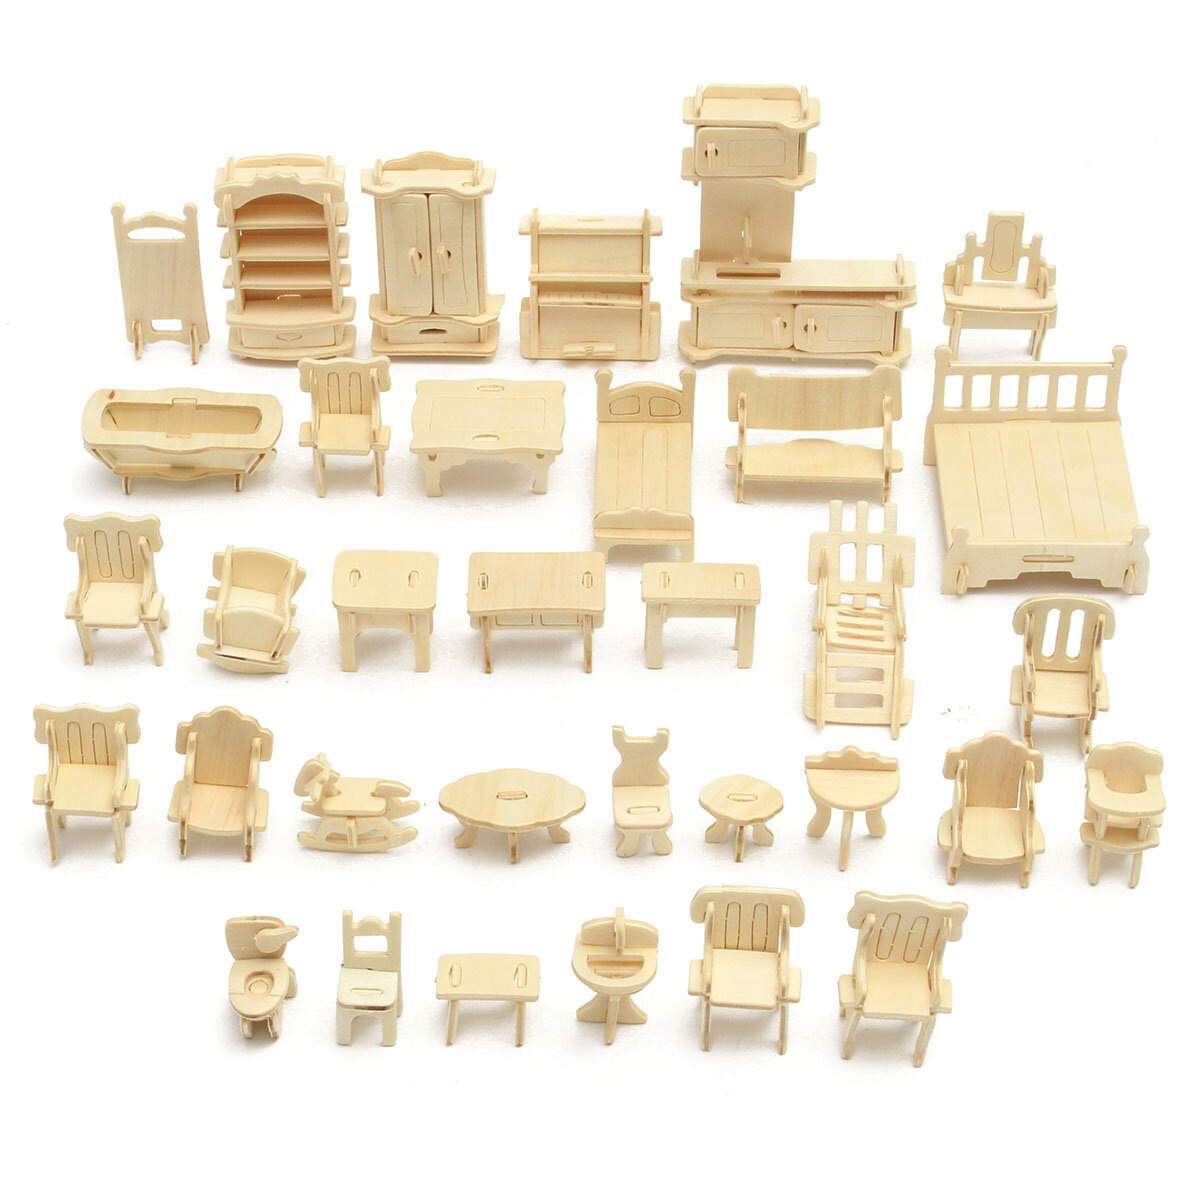 Diy Mini 34pcs Set Kids Educational Doll House Accessories Furniture 3d Woodcraft Puzzle Model Kit Handmade Toys Sale Banggood Com Sold Out Arrival Notice Arrival Notice